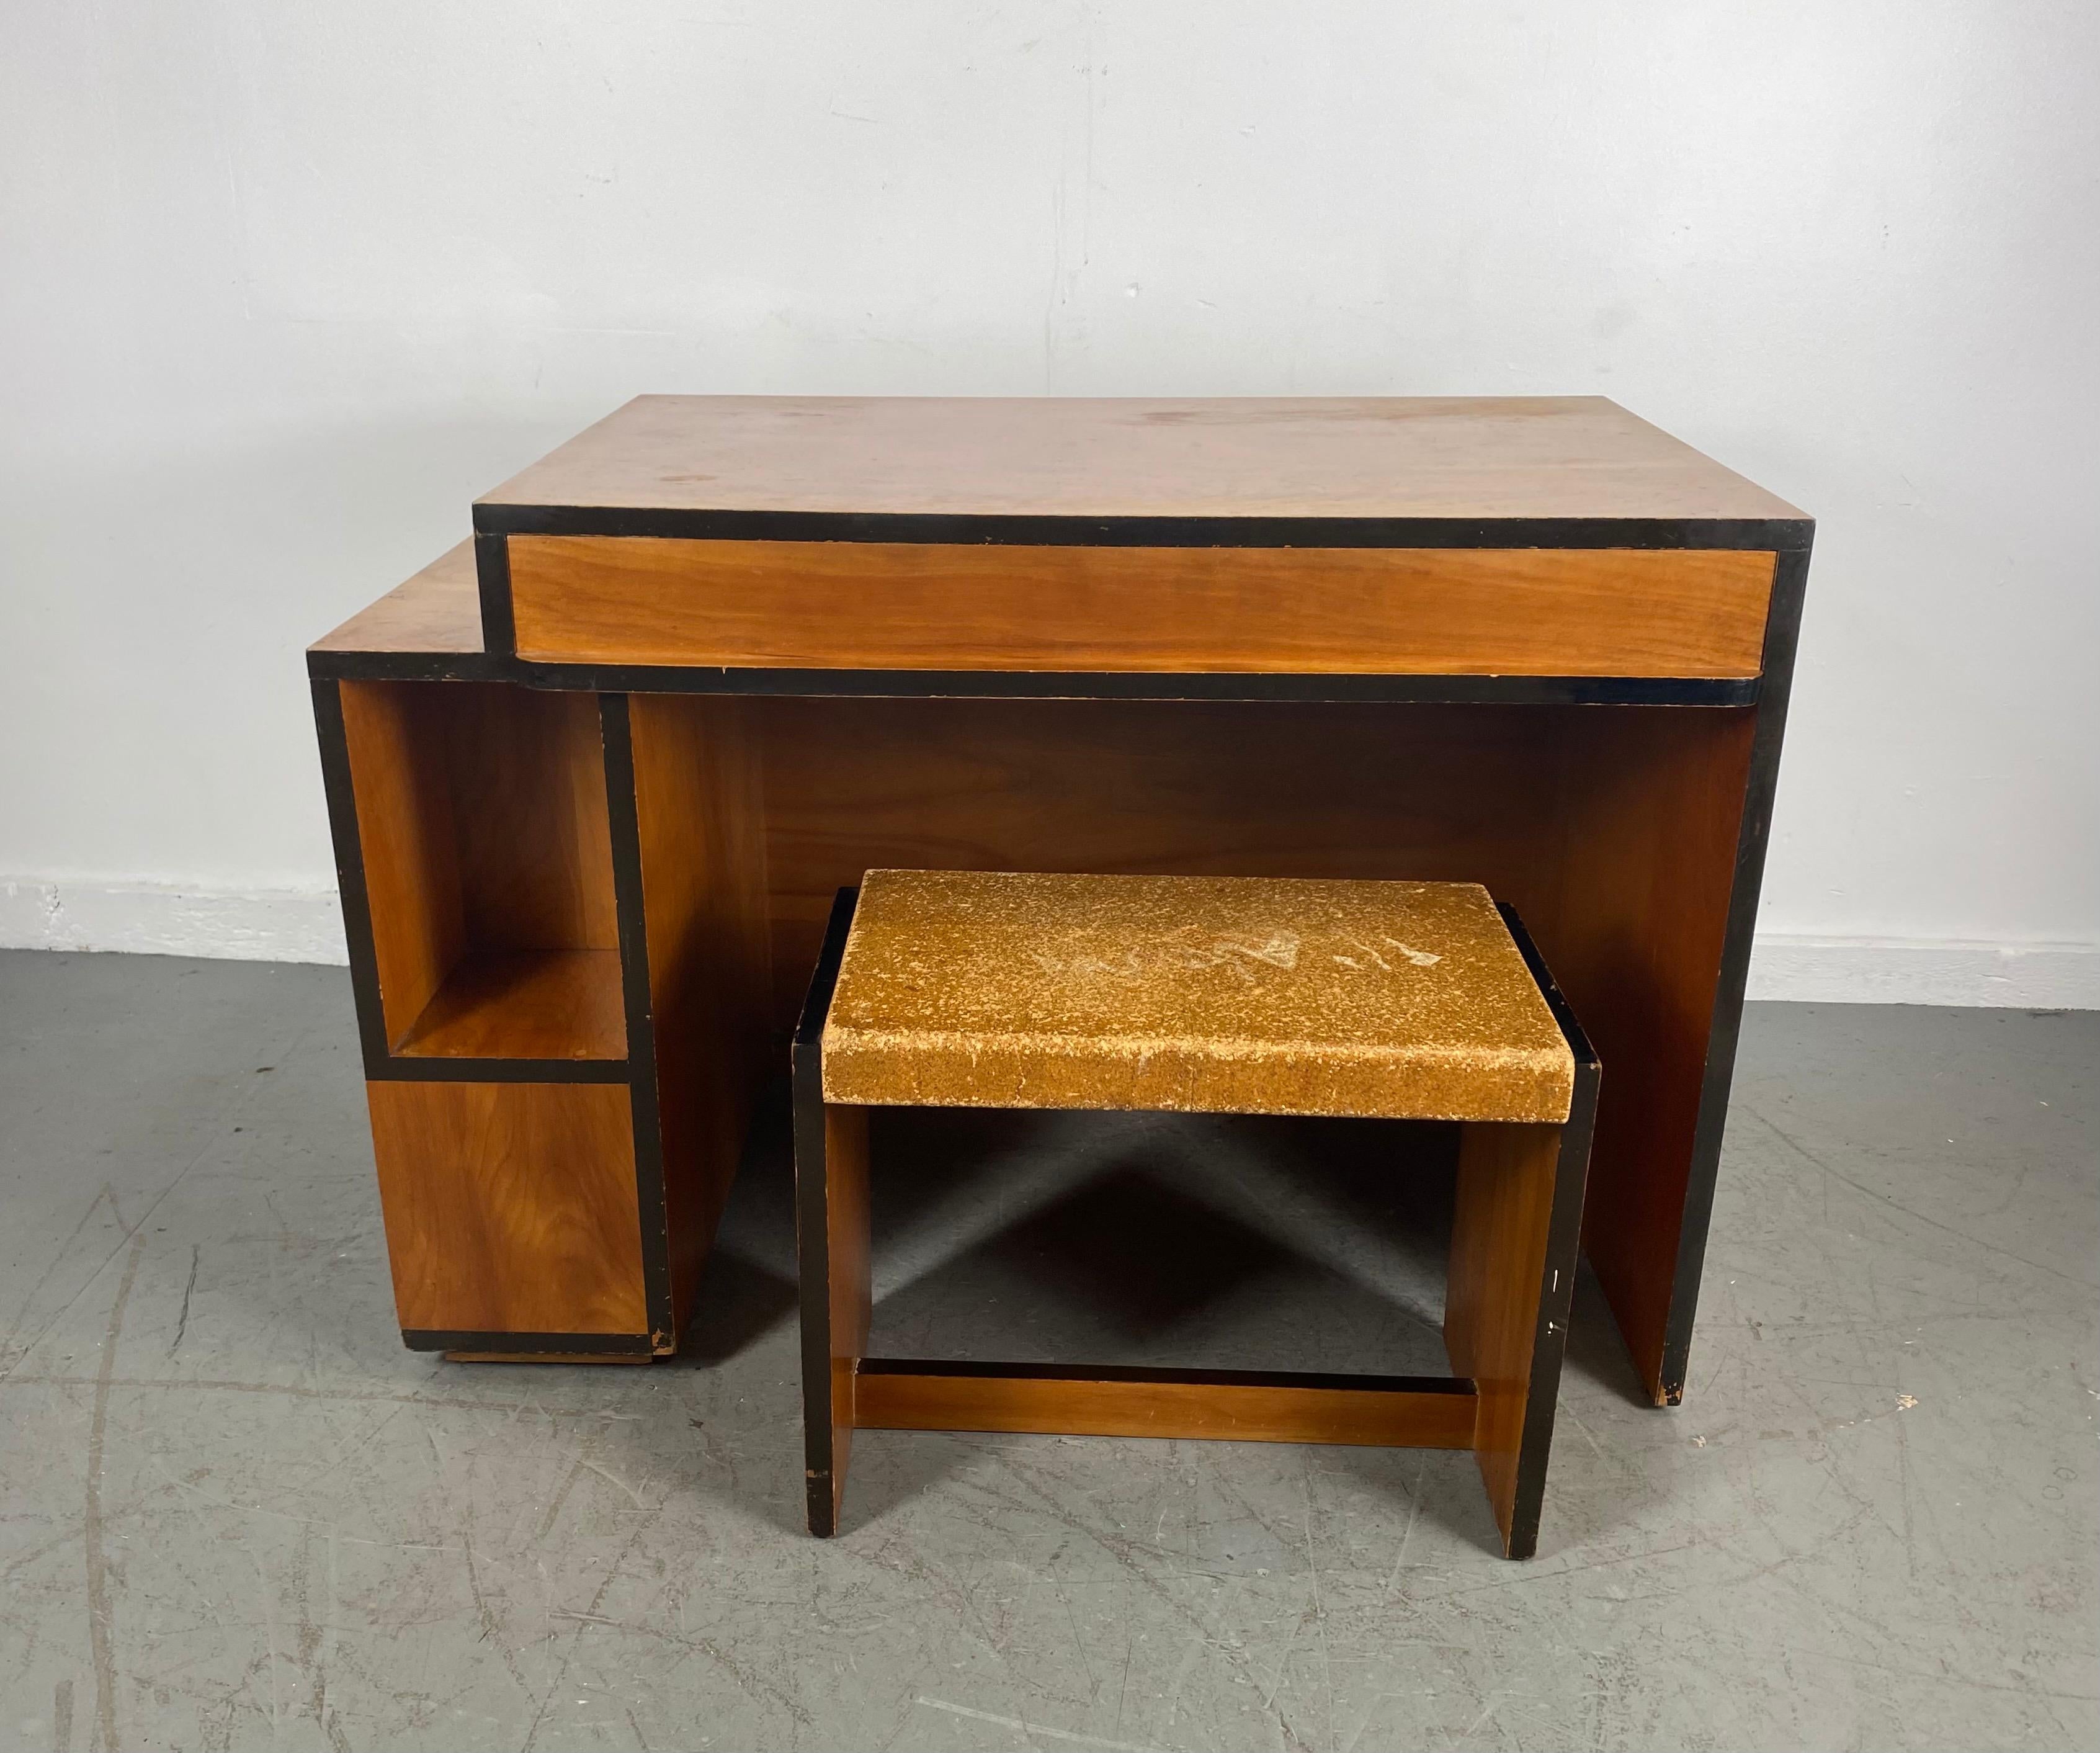 Stunning and rare bookcase desk and cork top seat designed and manufactured by Paul Frankl, I believe this was a transitional piece designed and built in the mid 1930s, stunning design, looks amazing from any angle, complete with original cork top